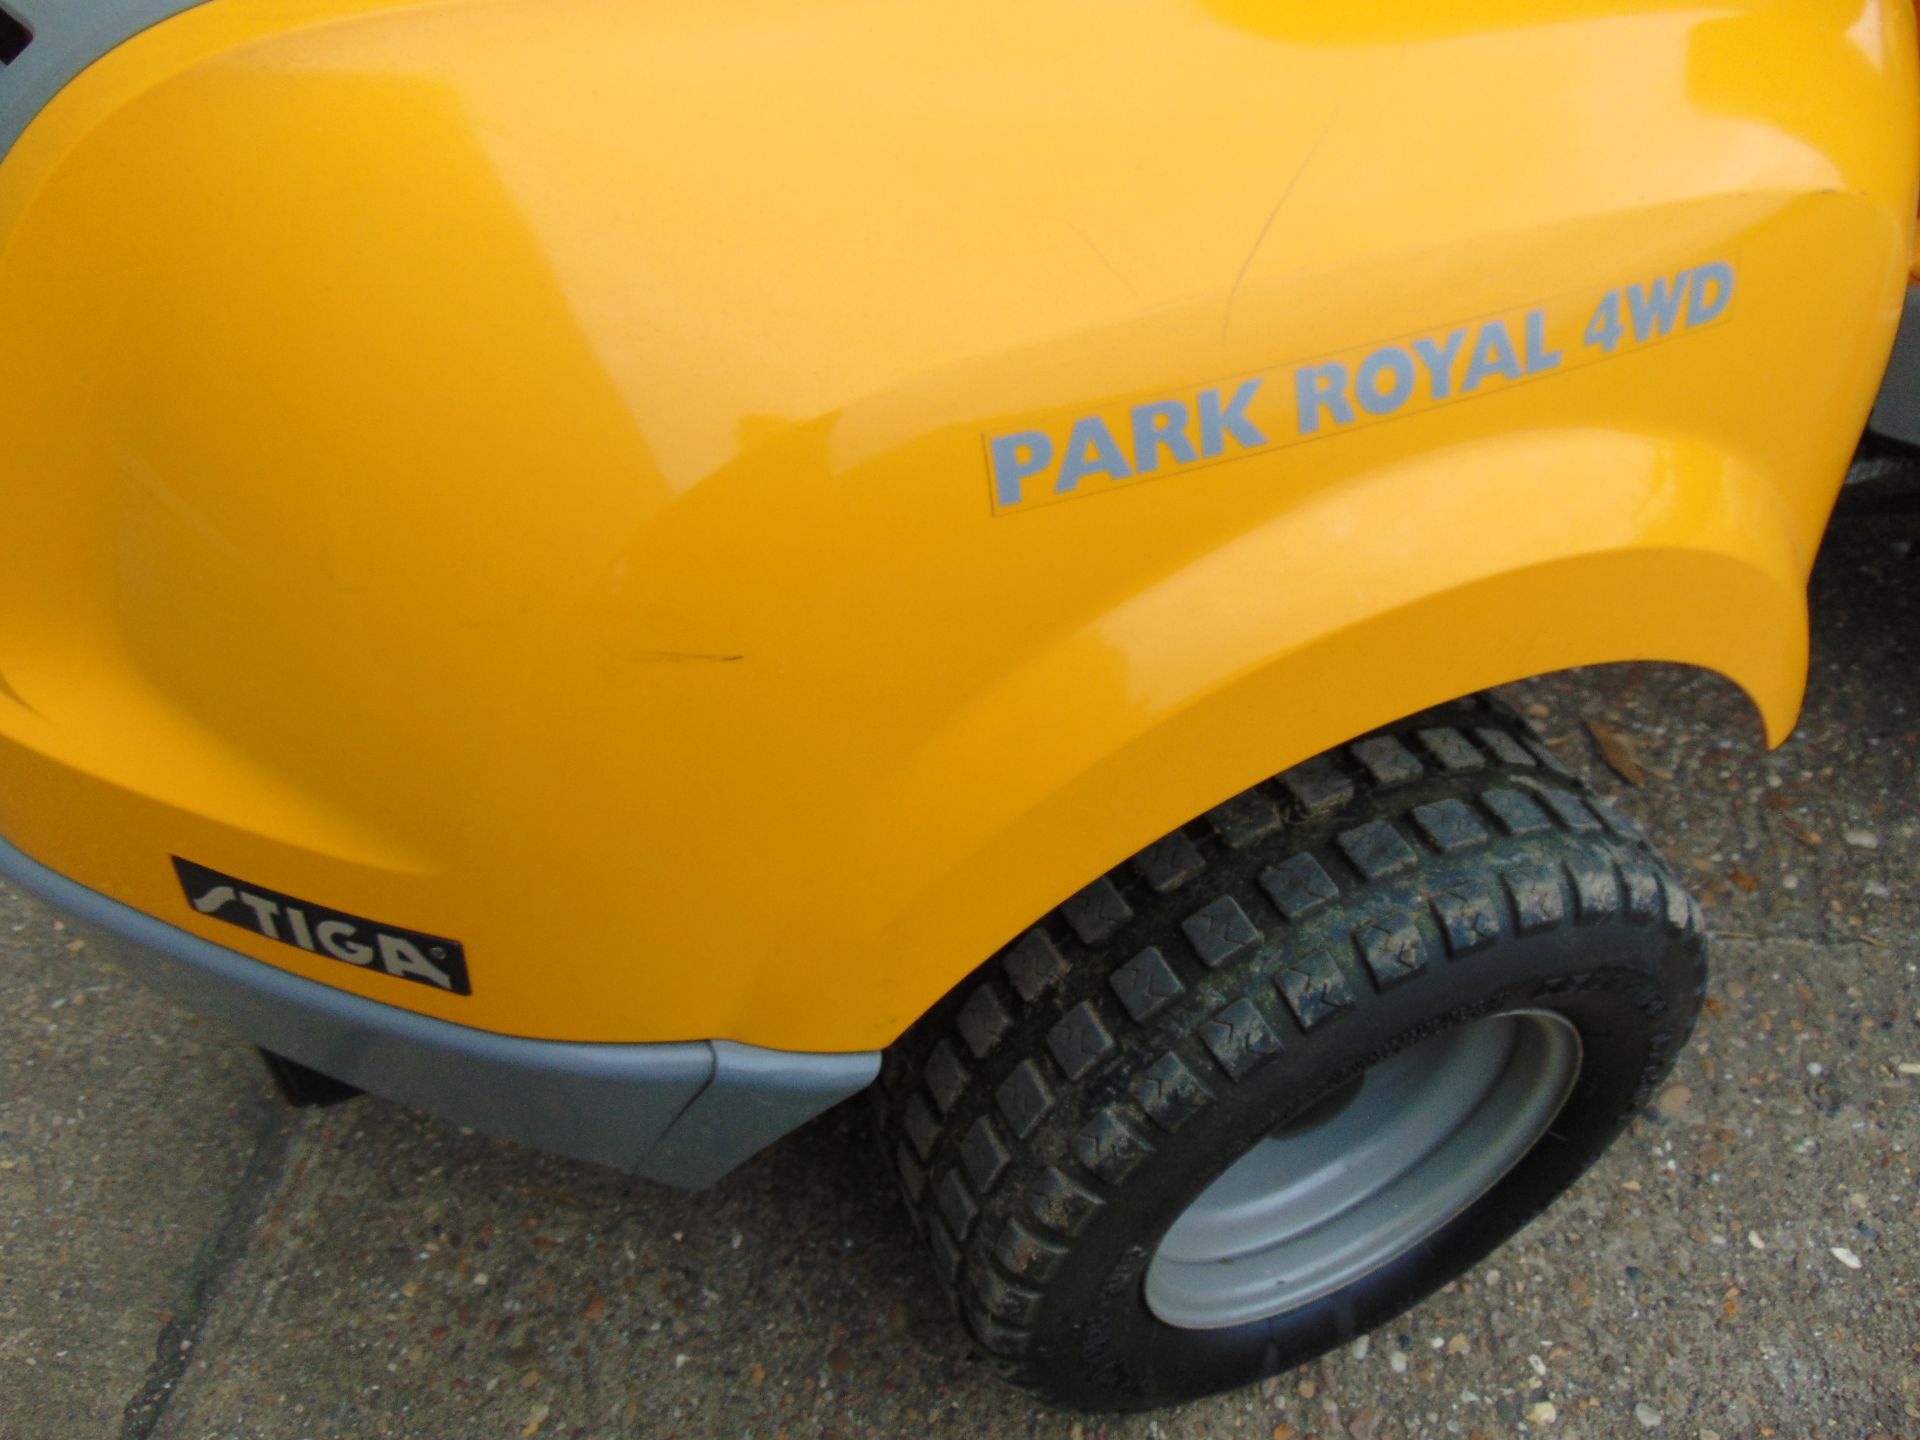 2013 Stiga Park Royal 4WD Ride On Flail Mower Lawn Tractor ONLY 67.9 HOURS! - Image 12 of 19